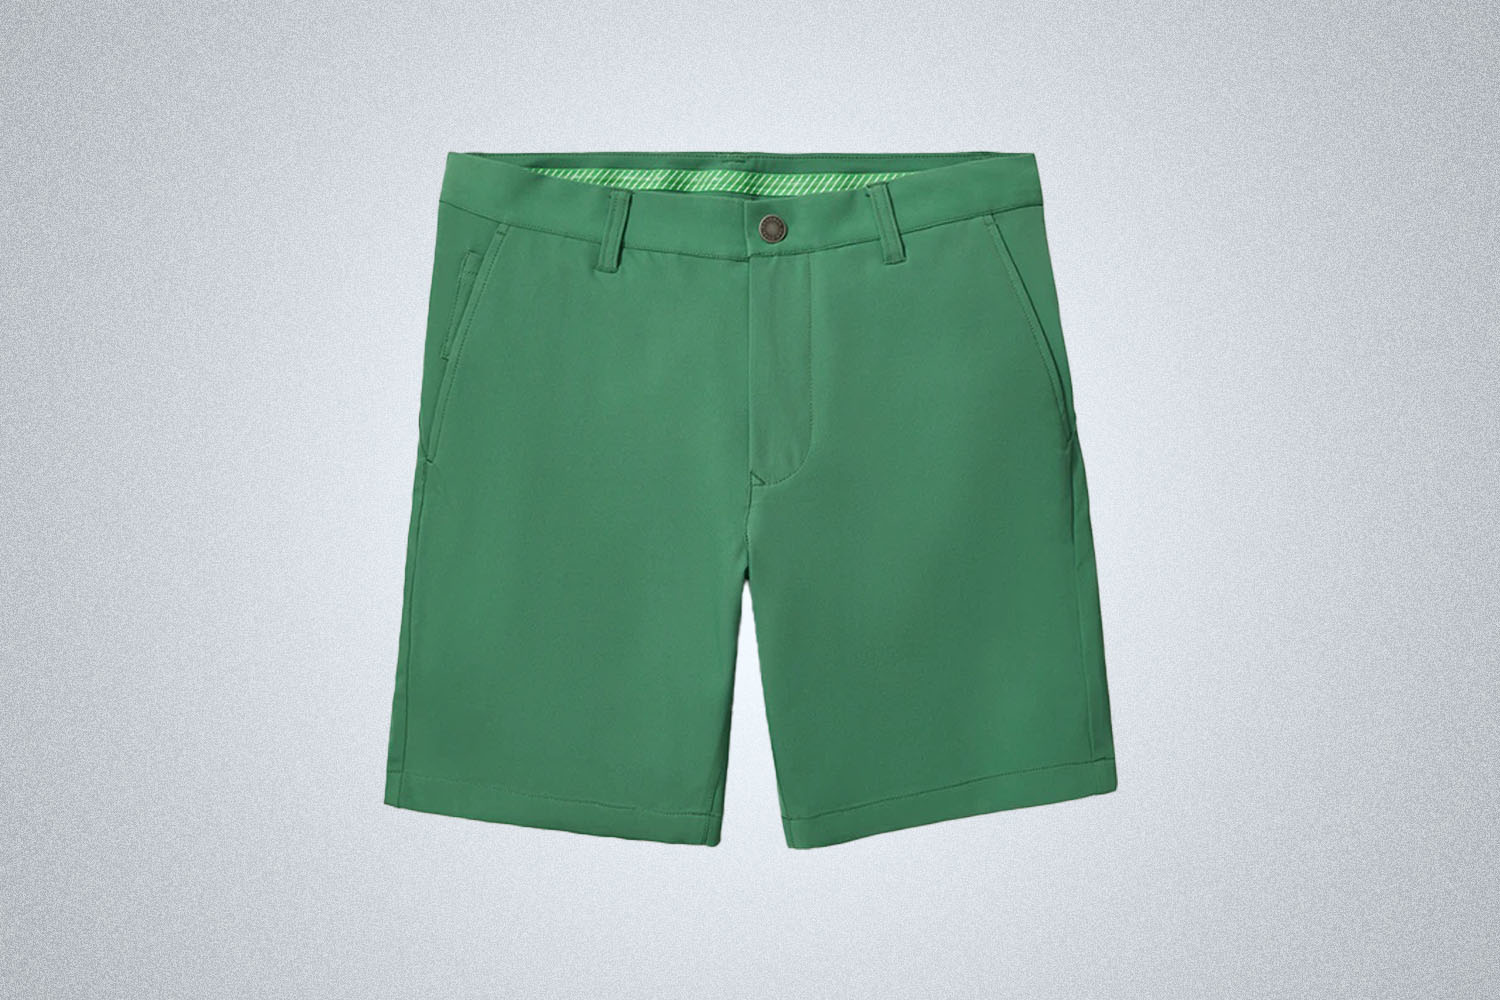 a pair of green golf shorts from Bonobos on a grey background